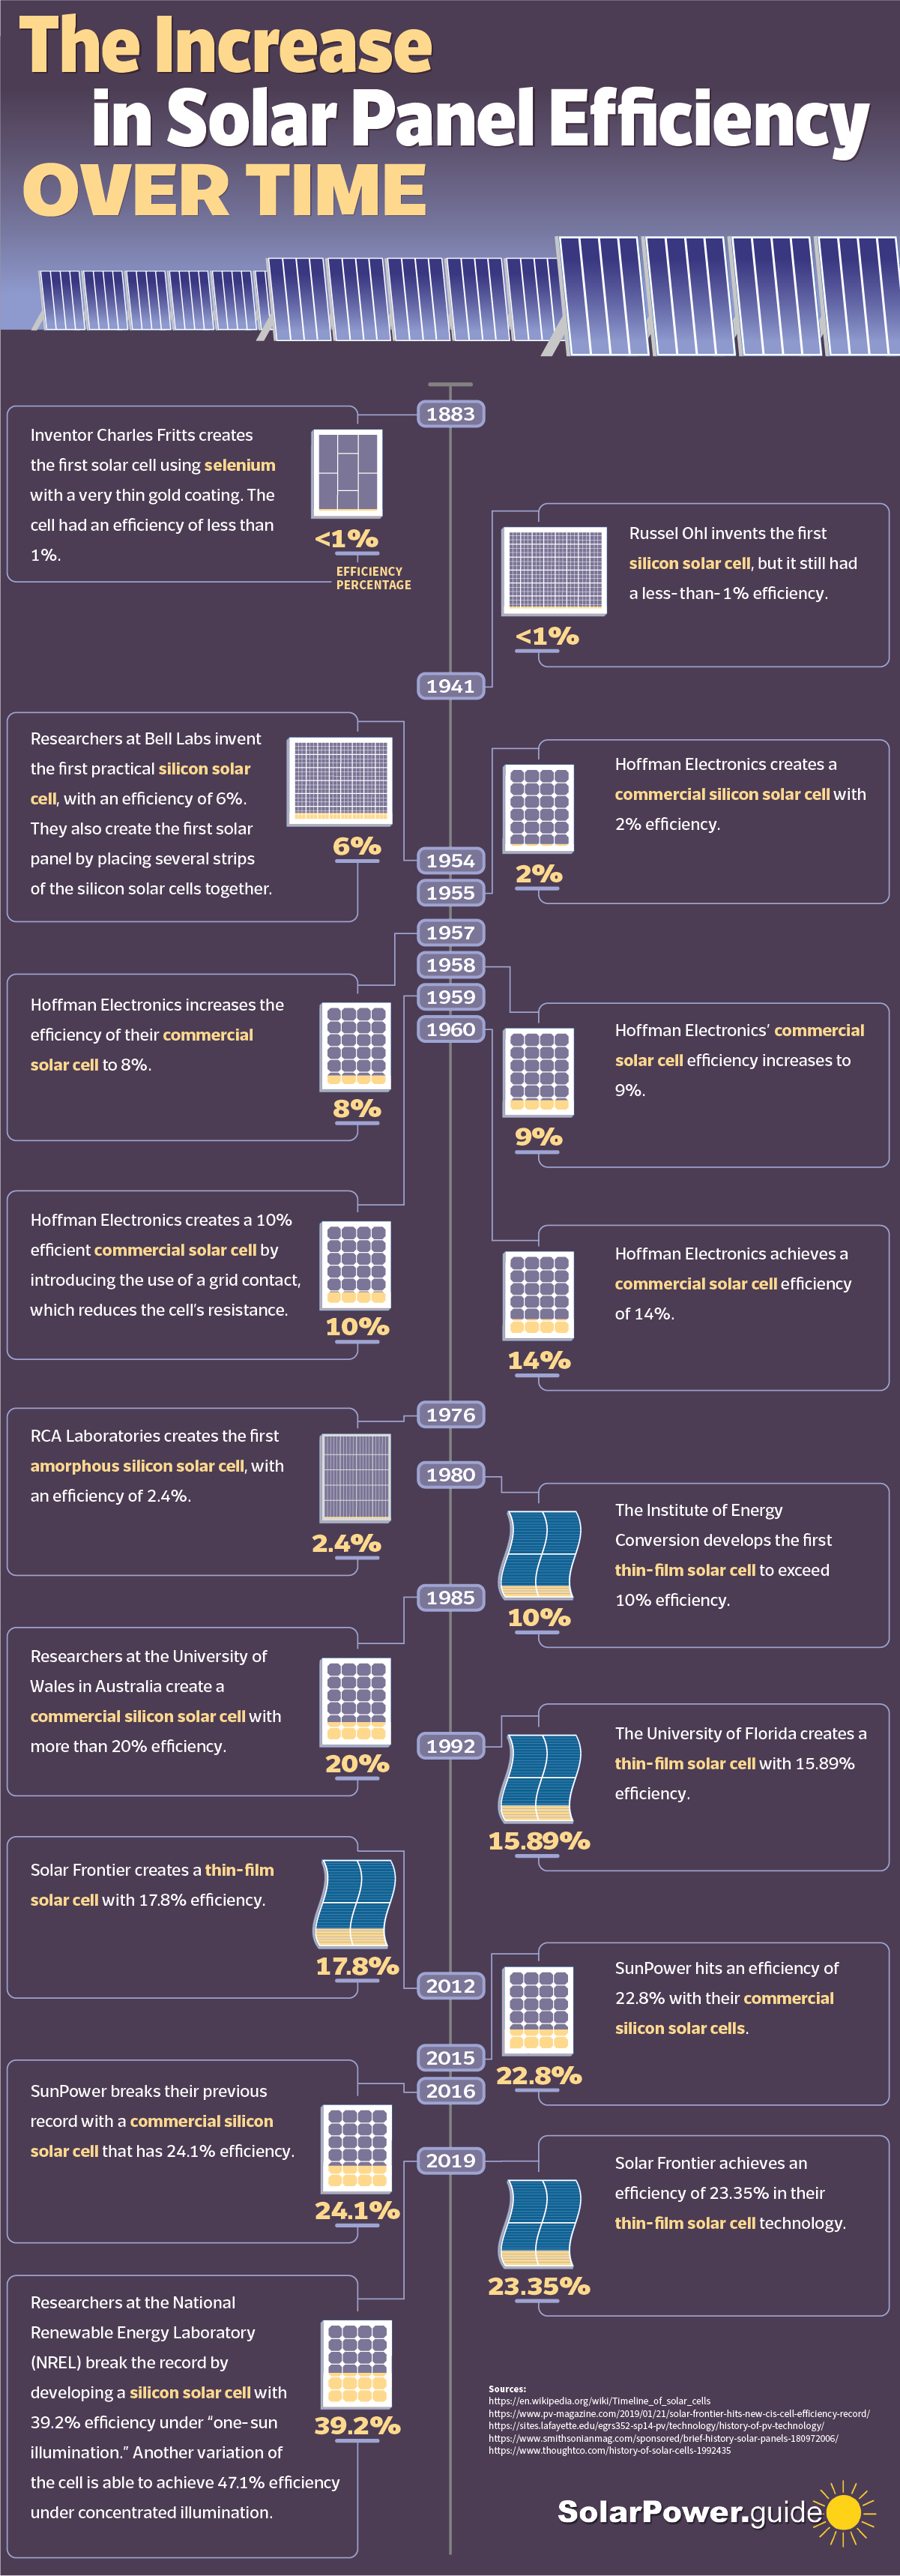 The Increase in Solar Panel Efficiency Over Time - Solar Power and Solar Energy Guide - Infographic